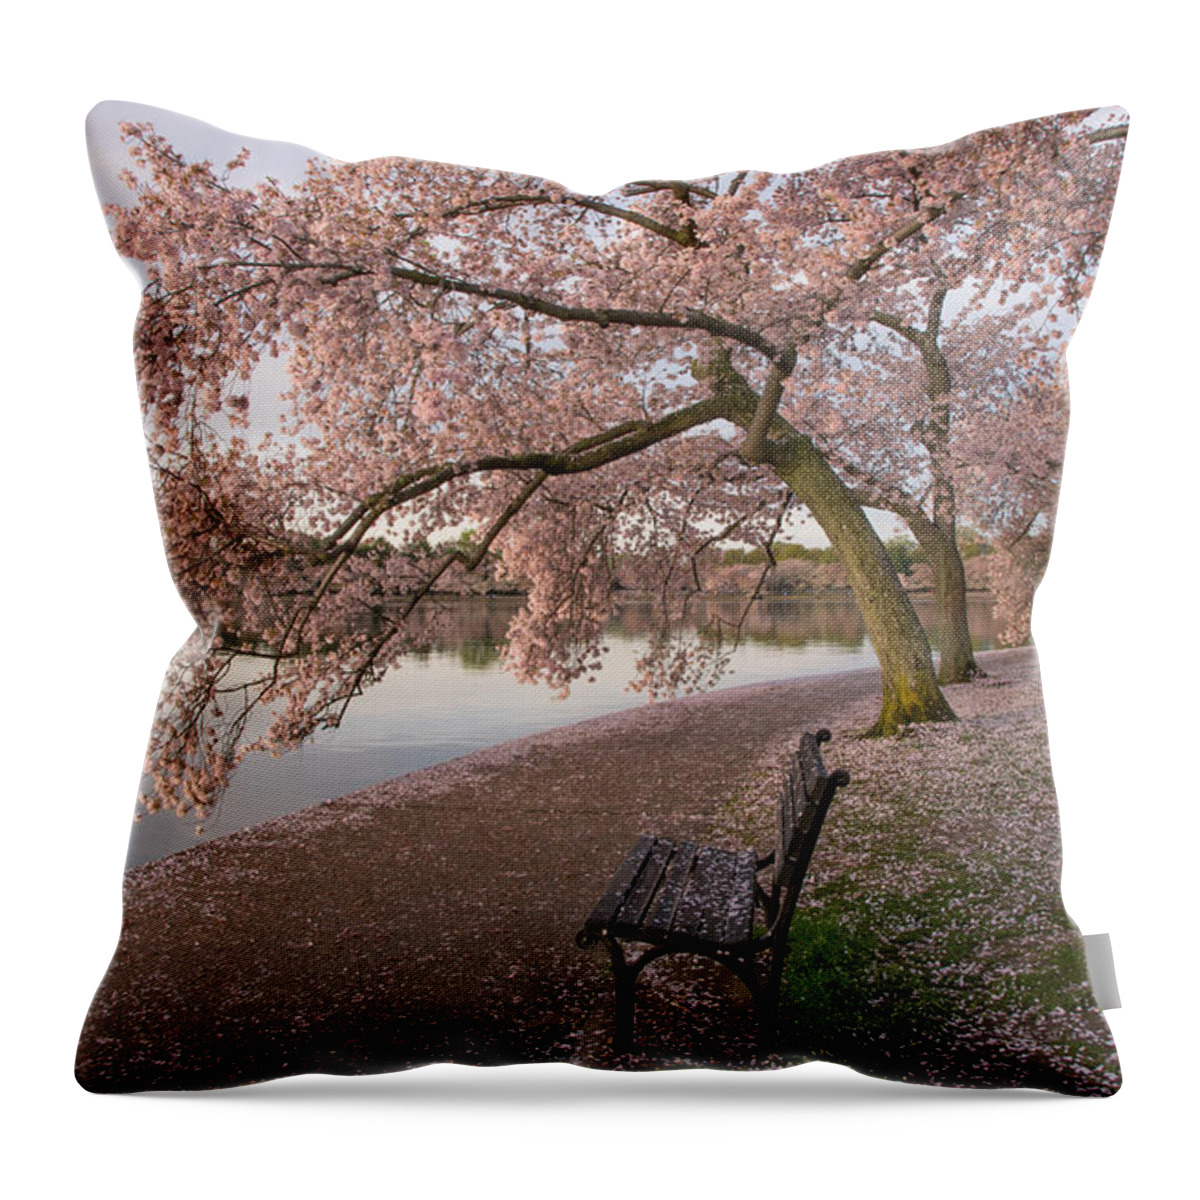 Basin Throw Pillow featuring the photograph Cherry Trees and park bench by Jack Nevitt